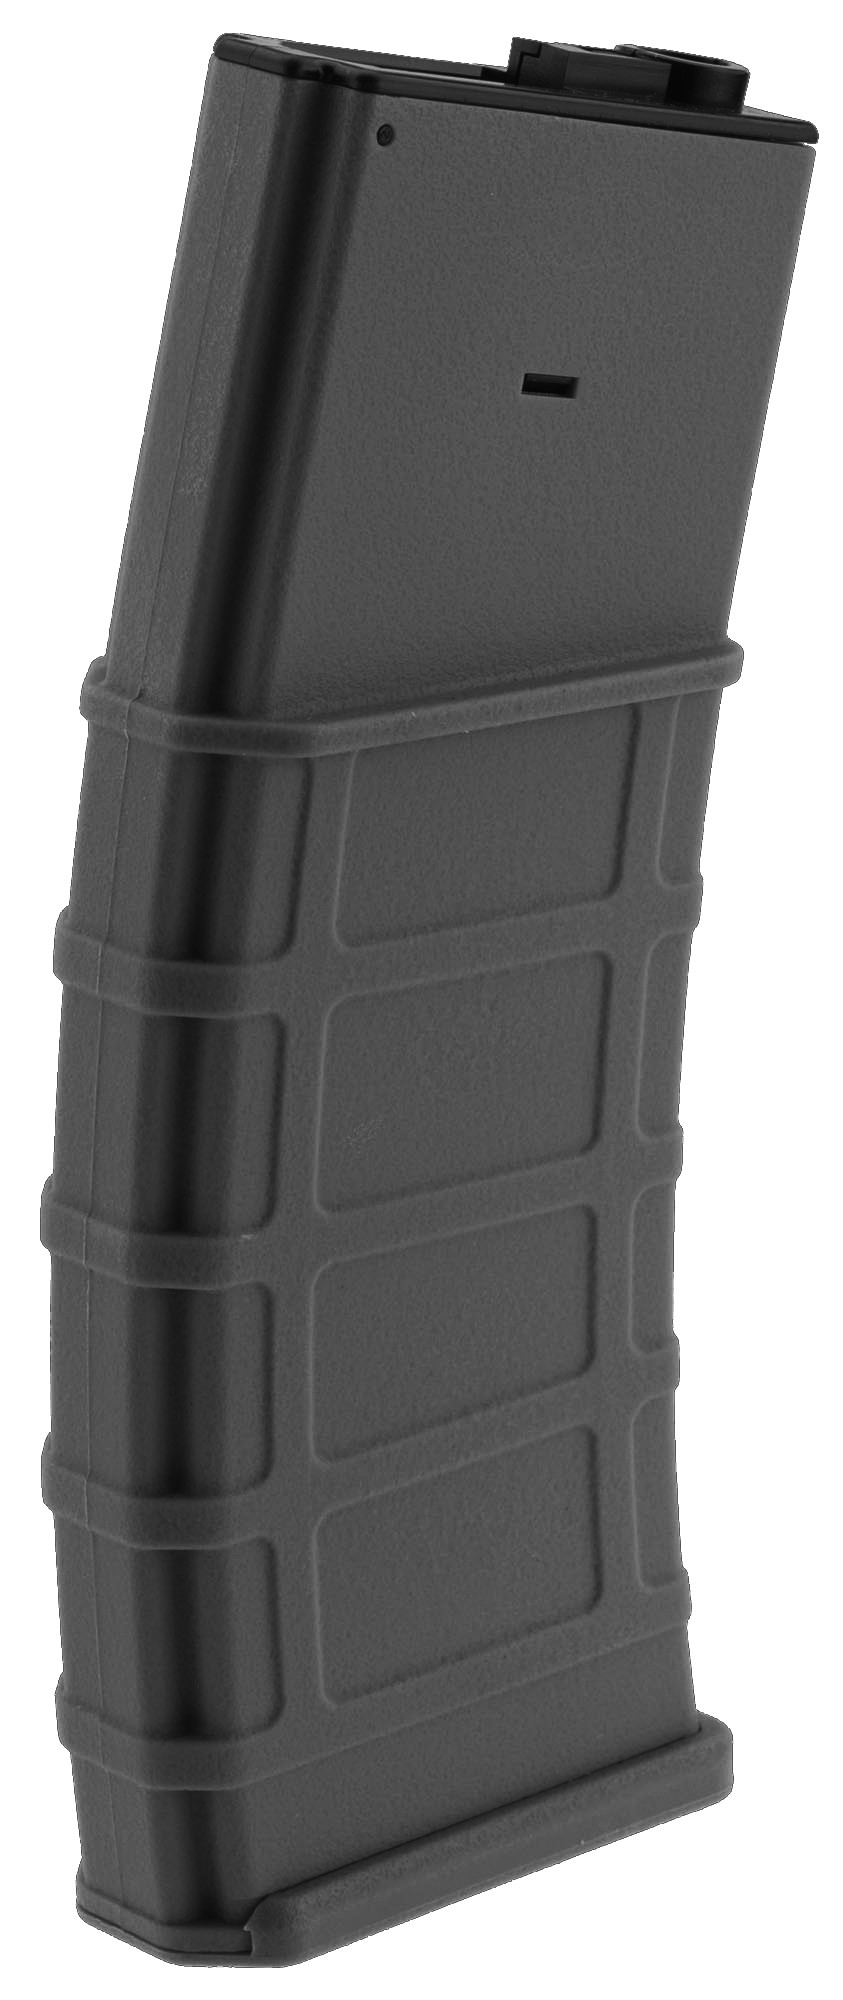 Photo Airsoft Magazine Polymer Flash Hi Cap 360 rds for M4-M16 (made by Lonex) - Black